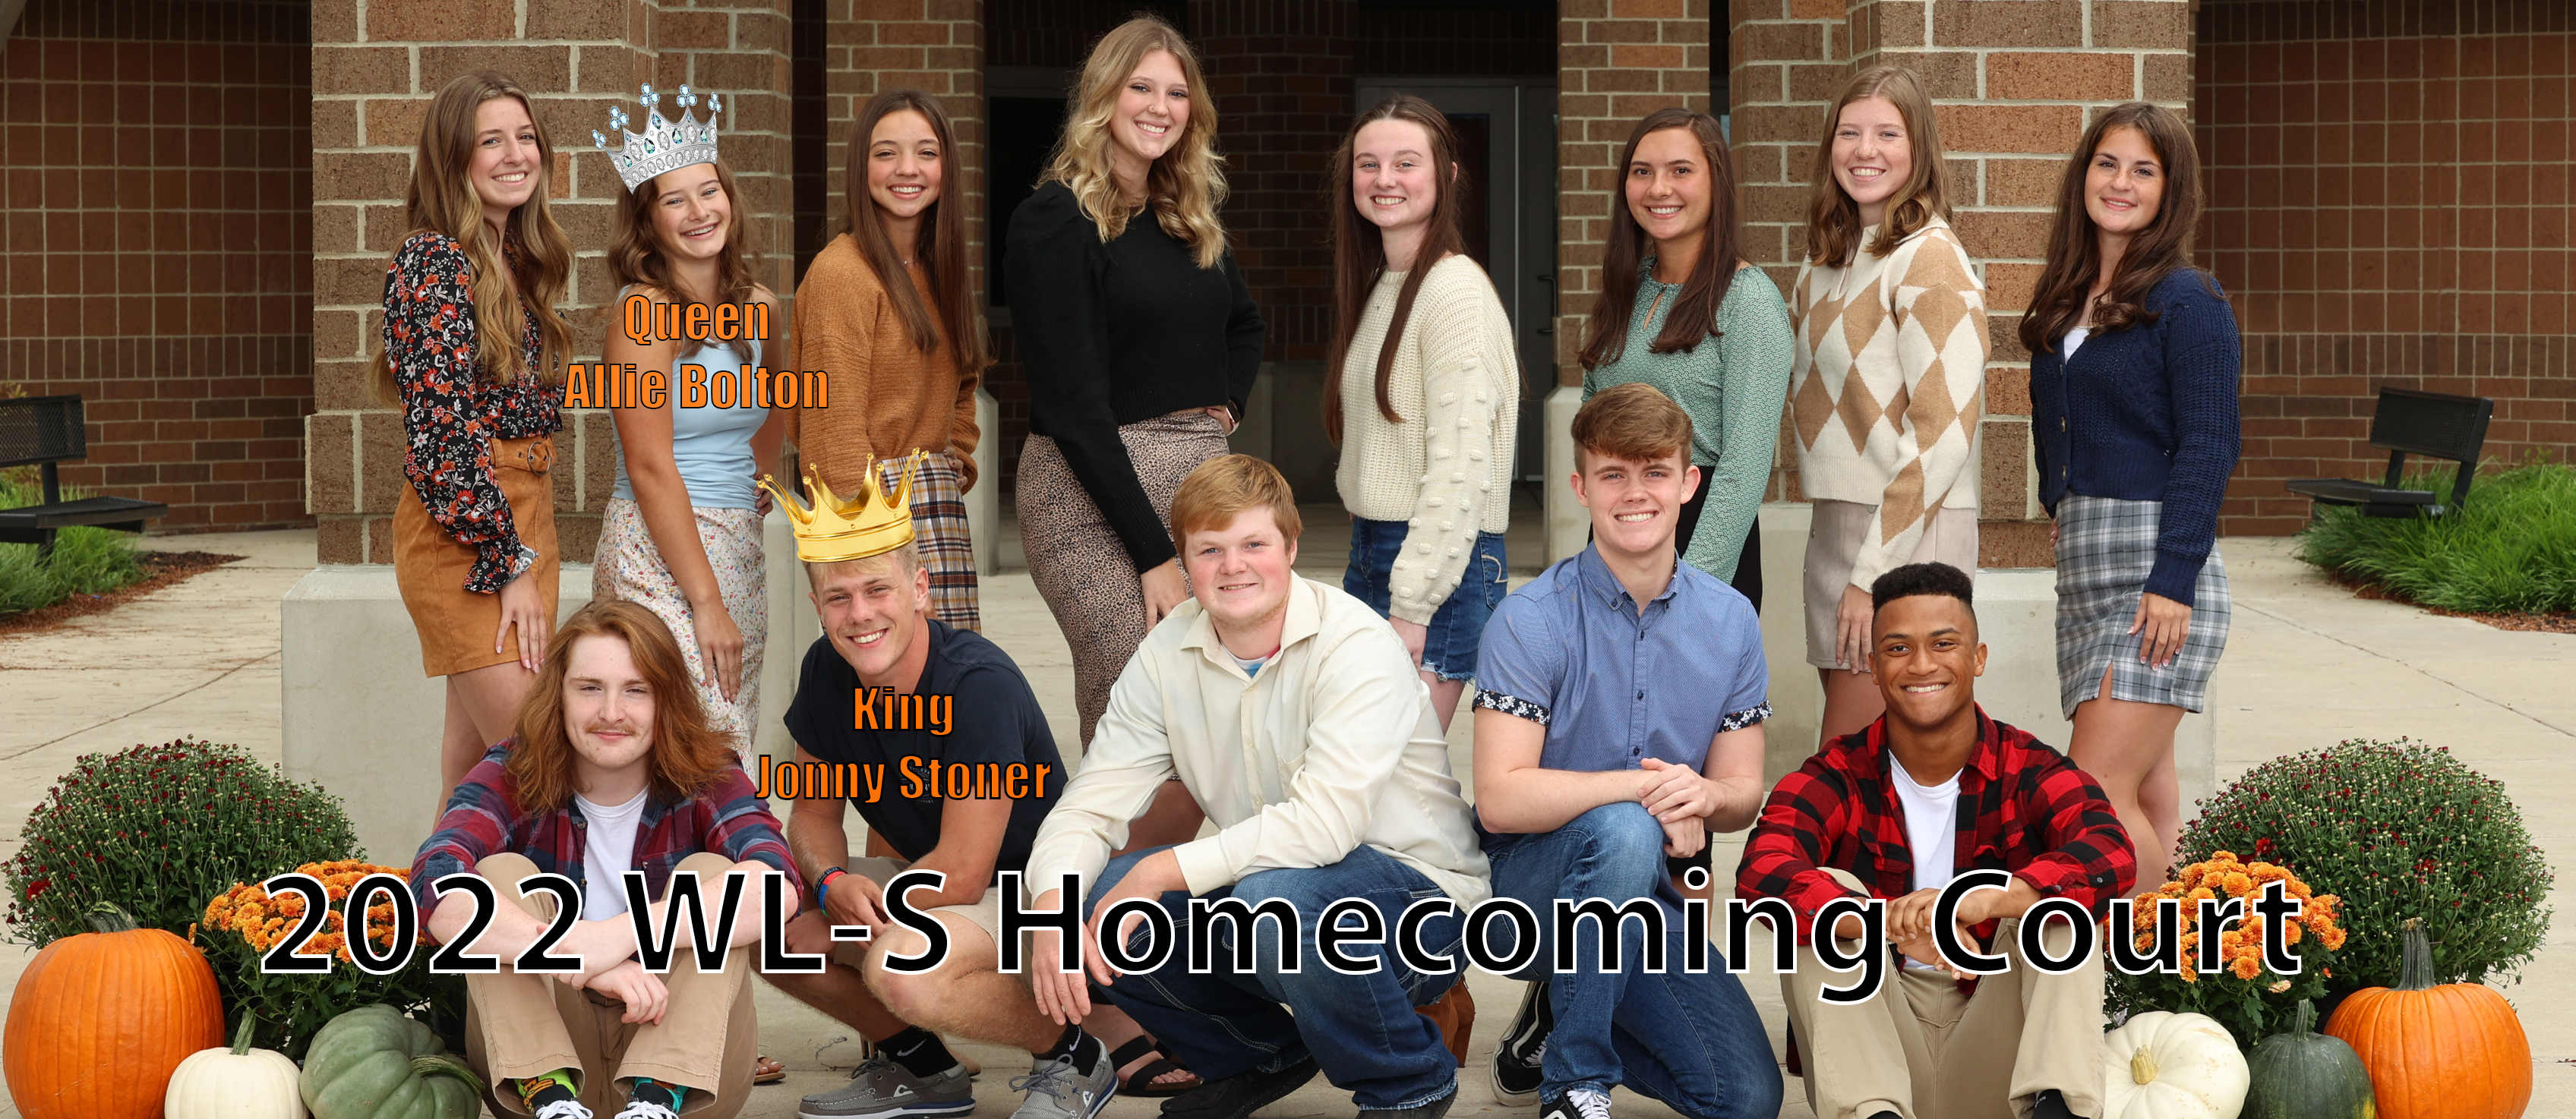 2022 WL-S Homecoming Court